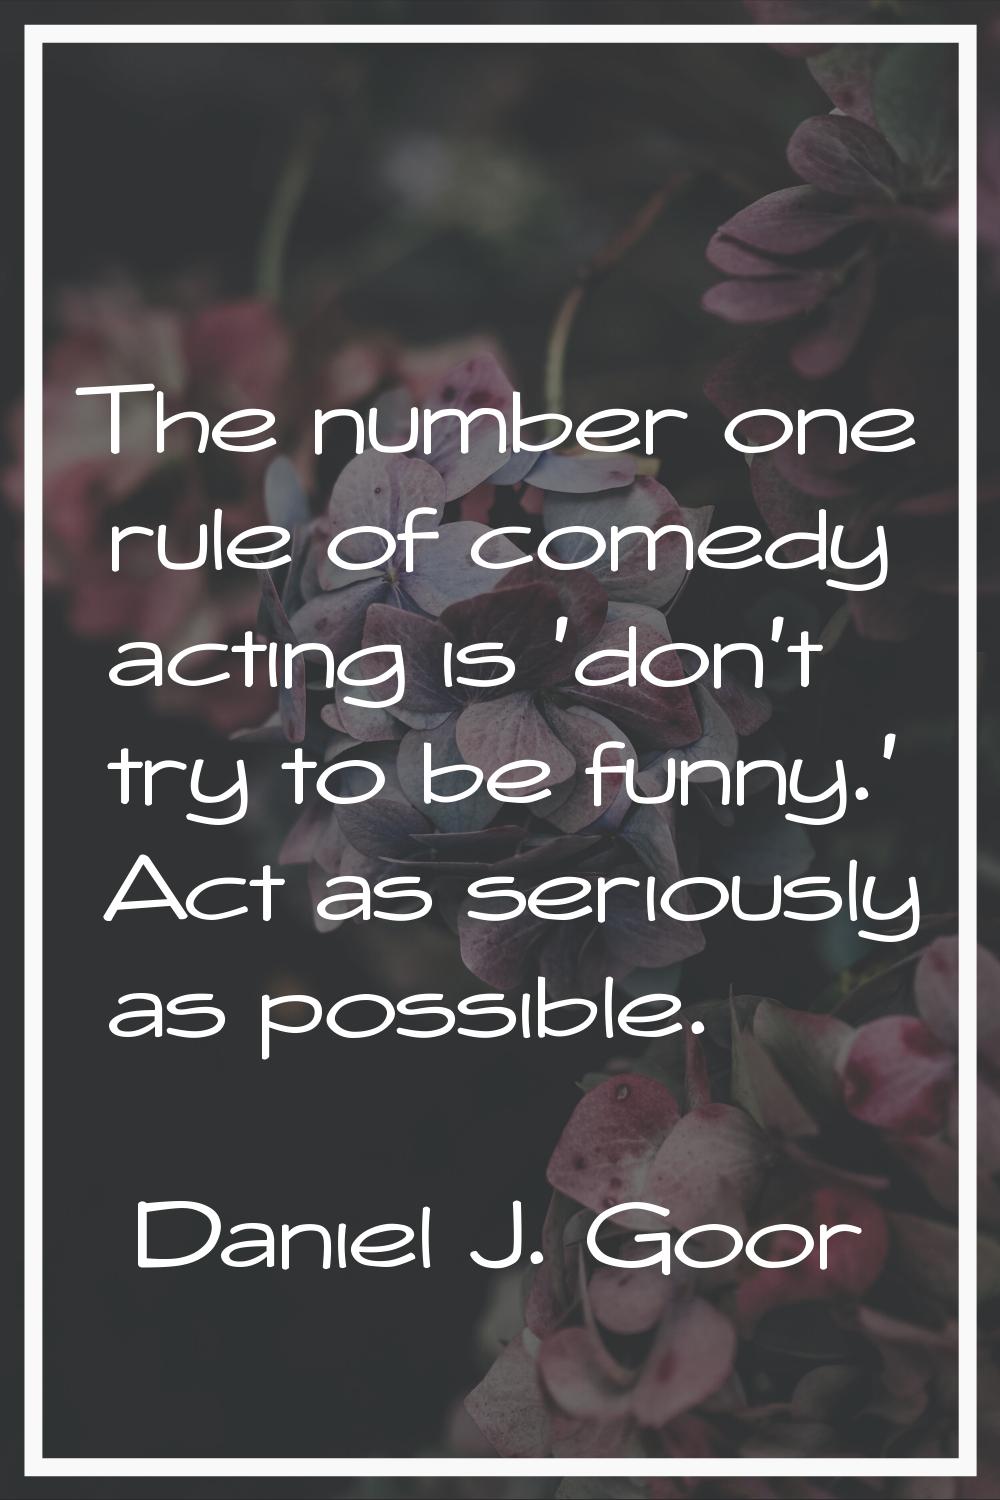 The number one rule of comedy acting is 'don't try to be funny.' Act as seriously as possible.